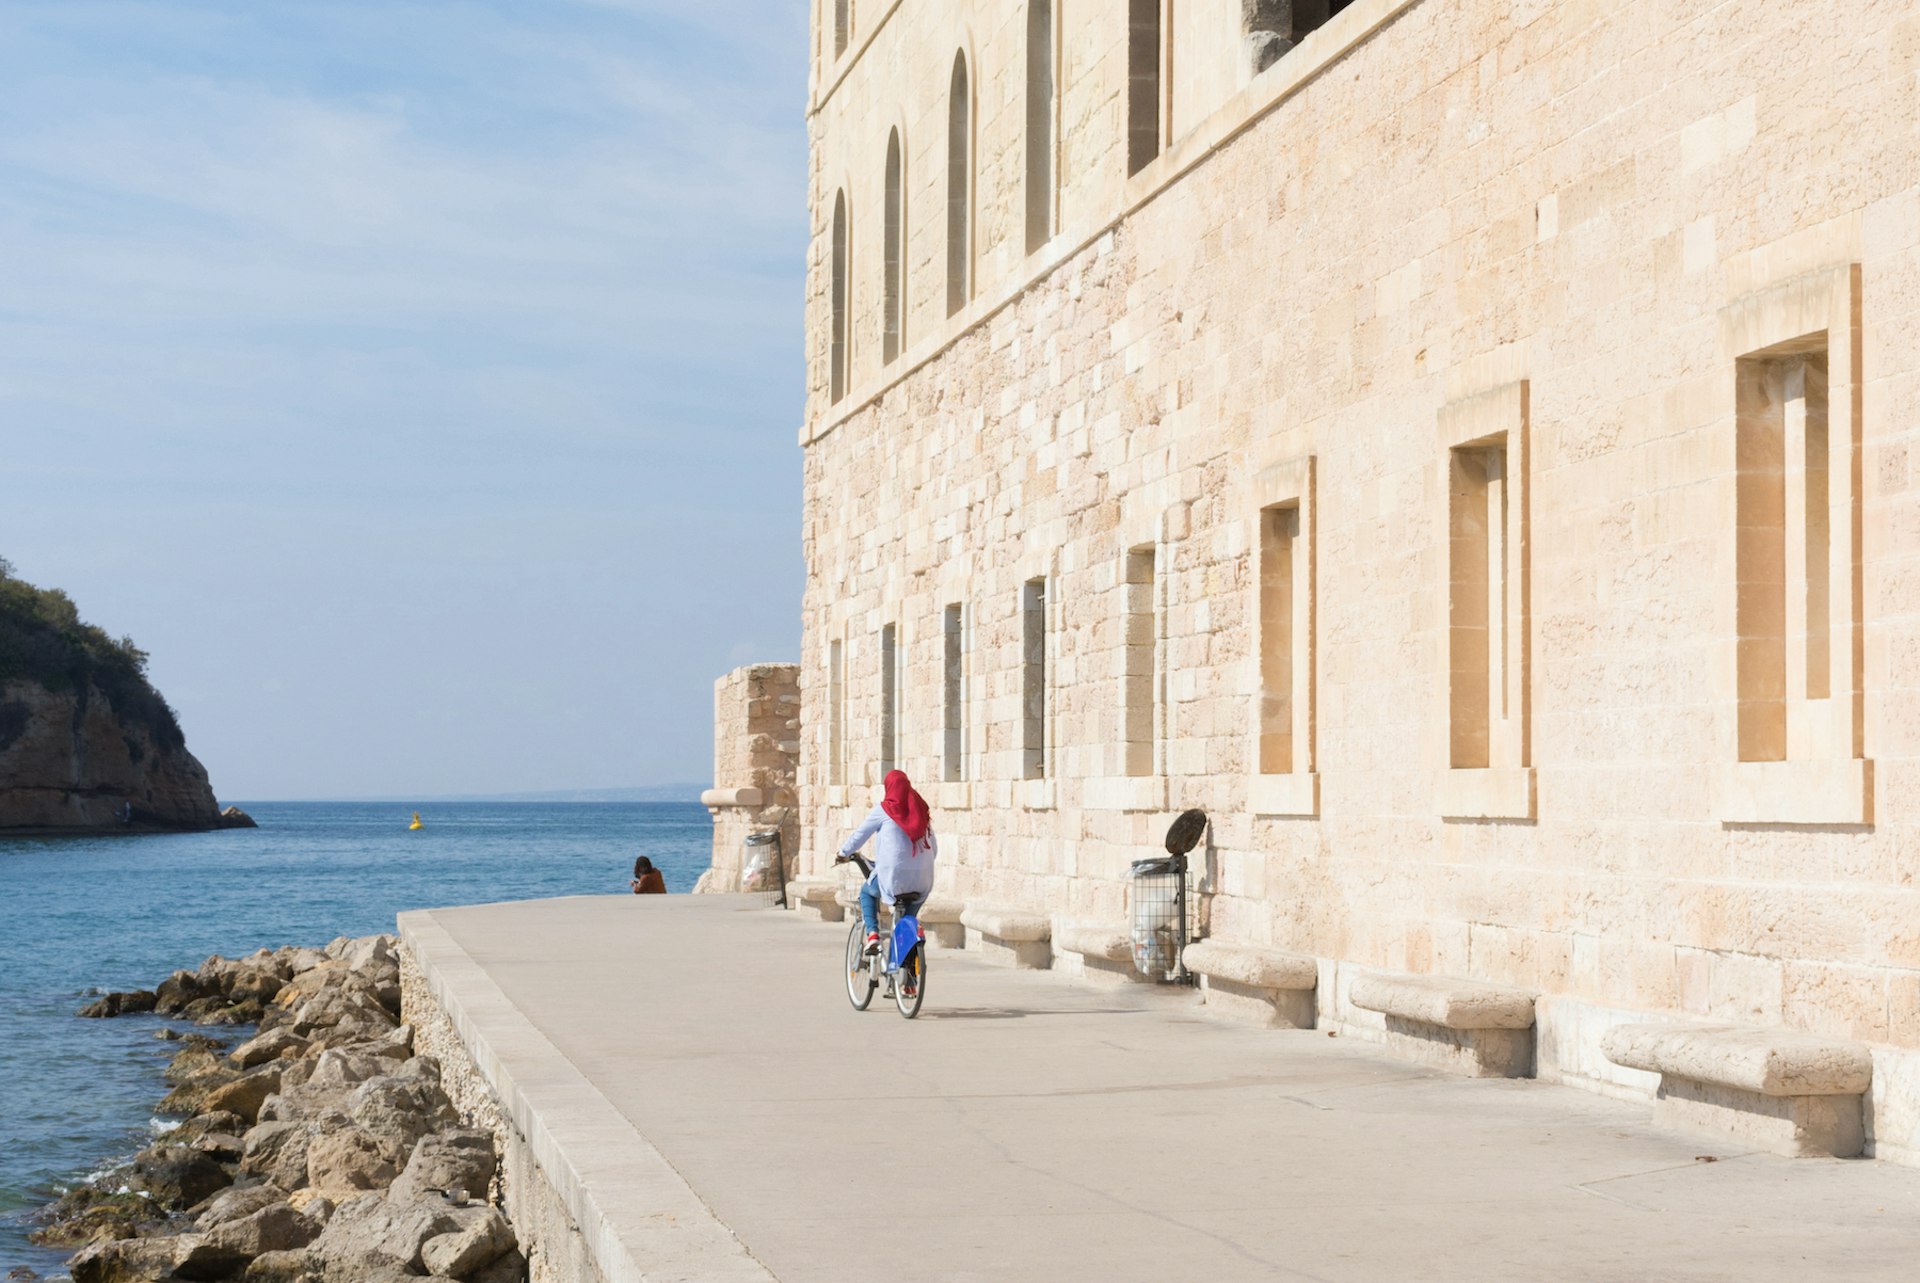 A woman wearing a hijab bicycling on a pathway next to the Mediterranean Sea, Marseille, Bouches-du-Rhône, France